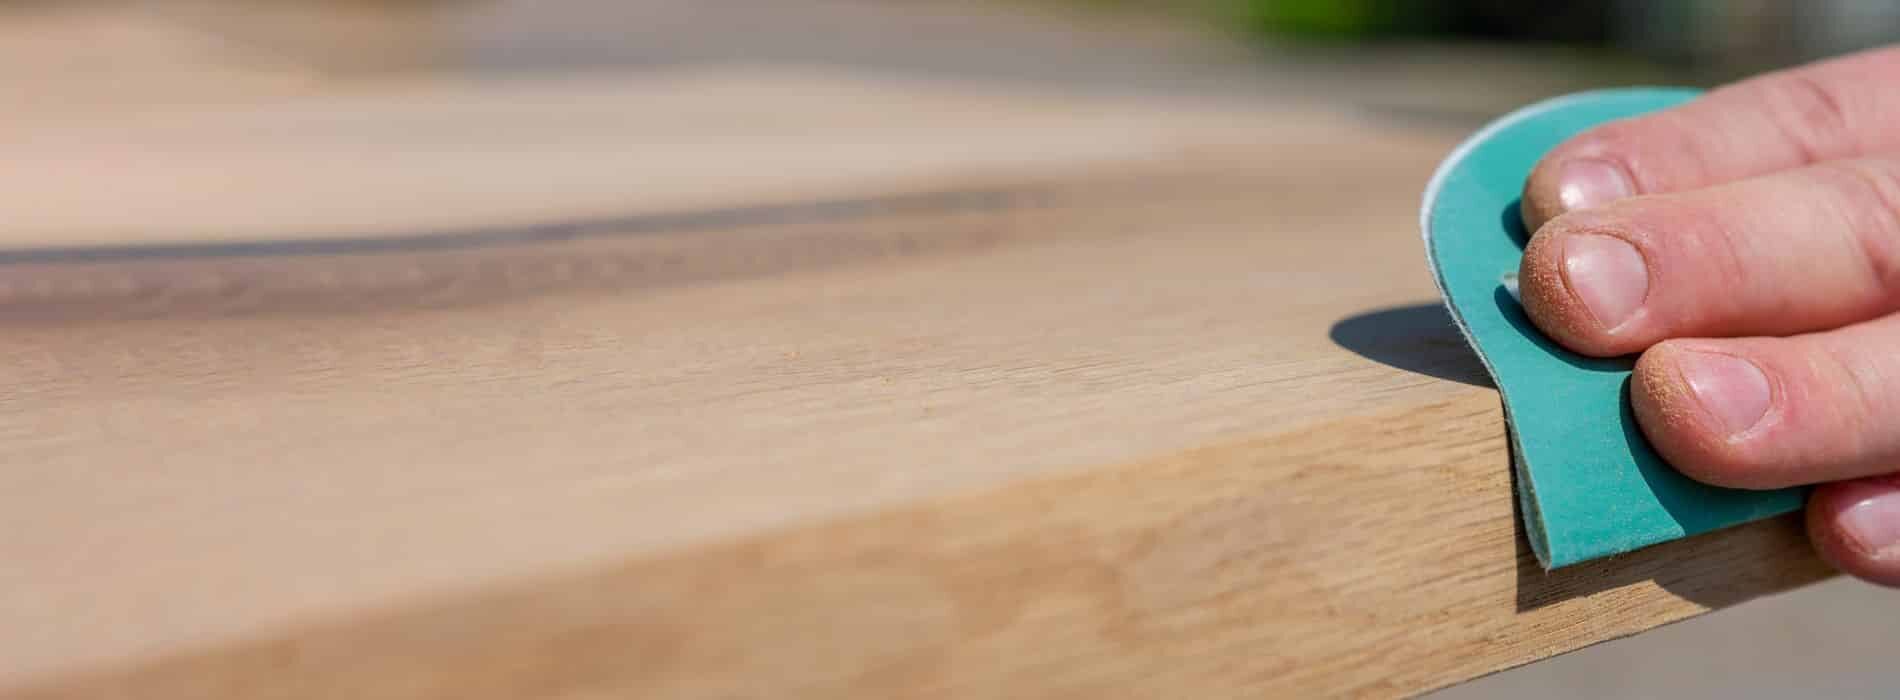 A close up of a person's hand holding a piece of wood.